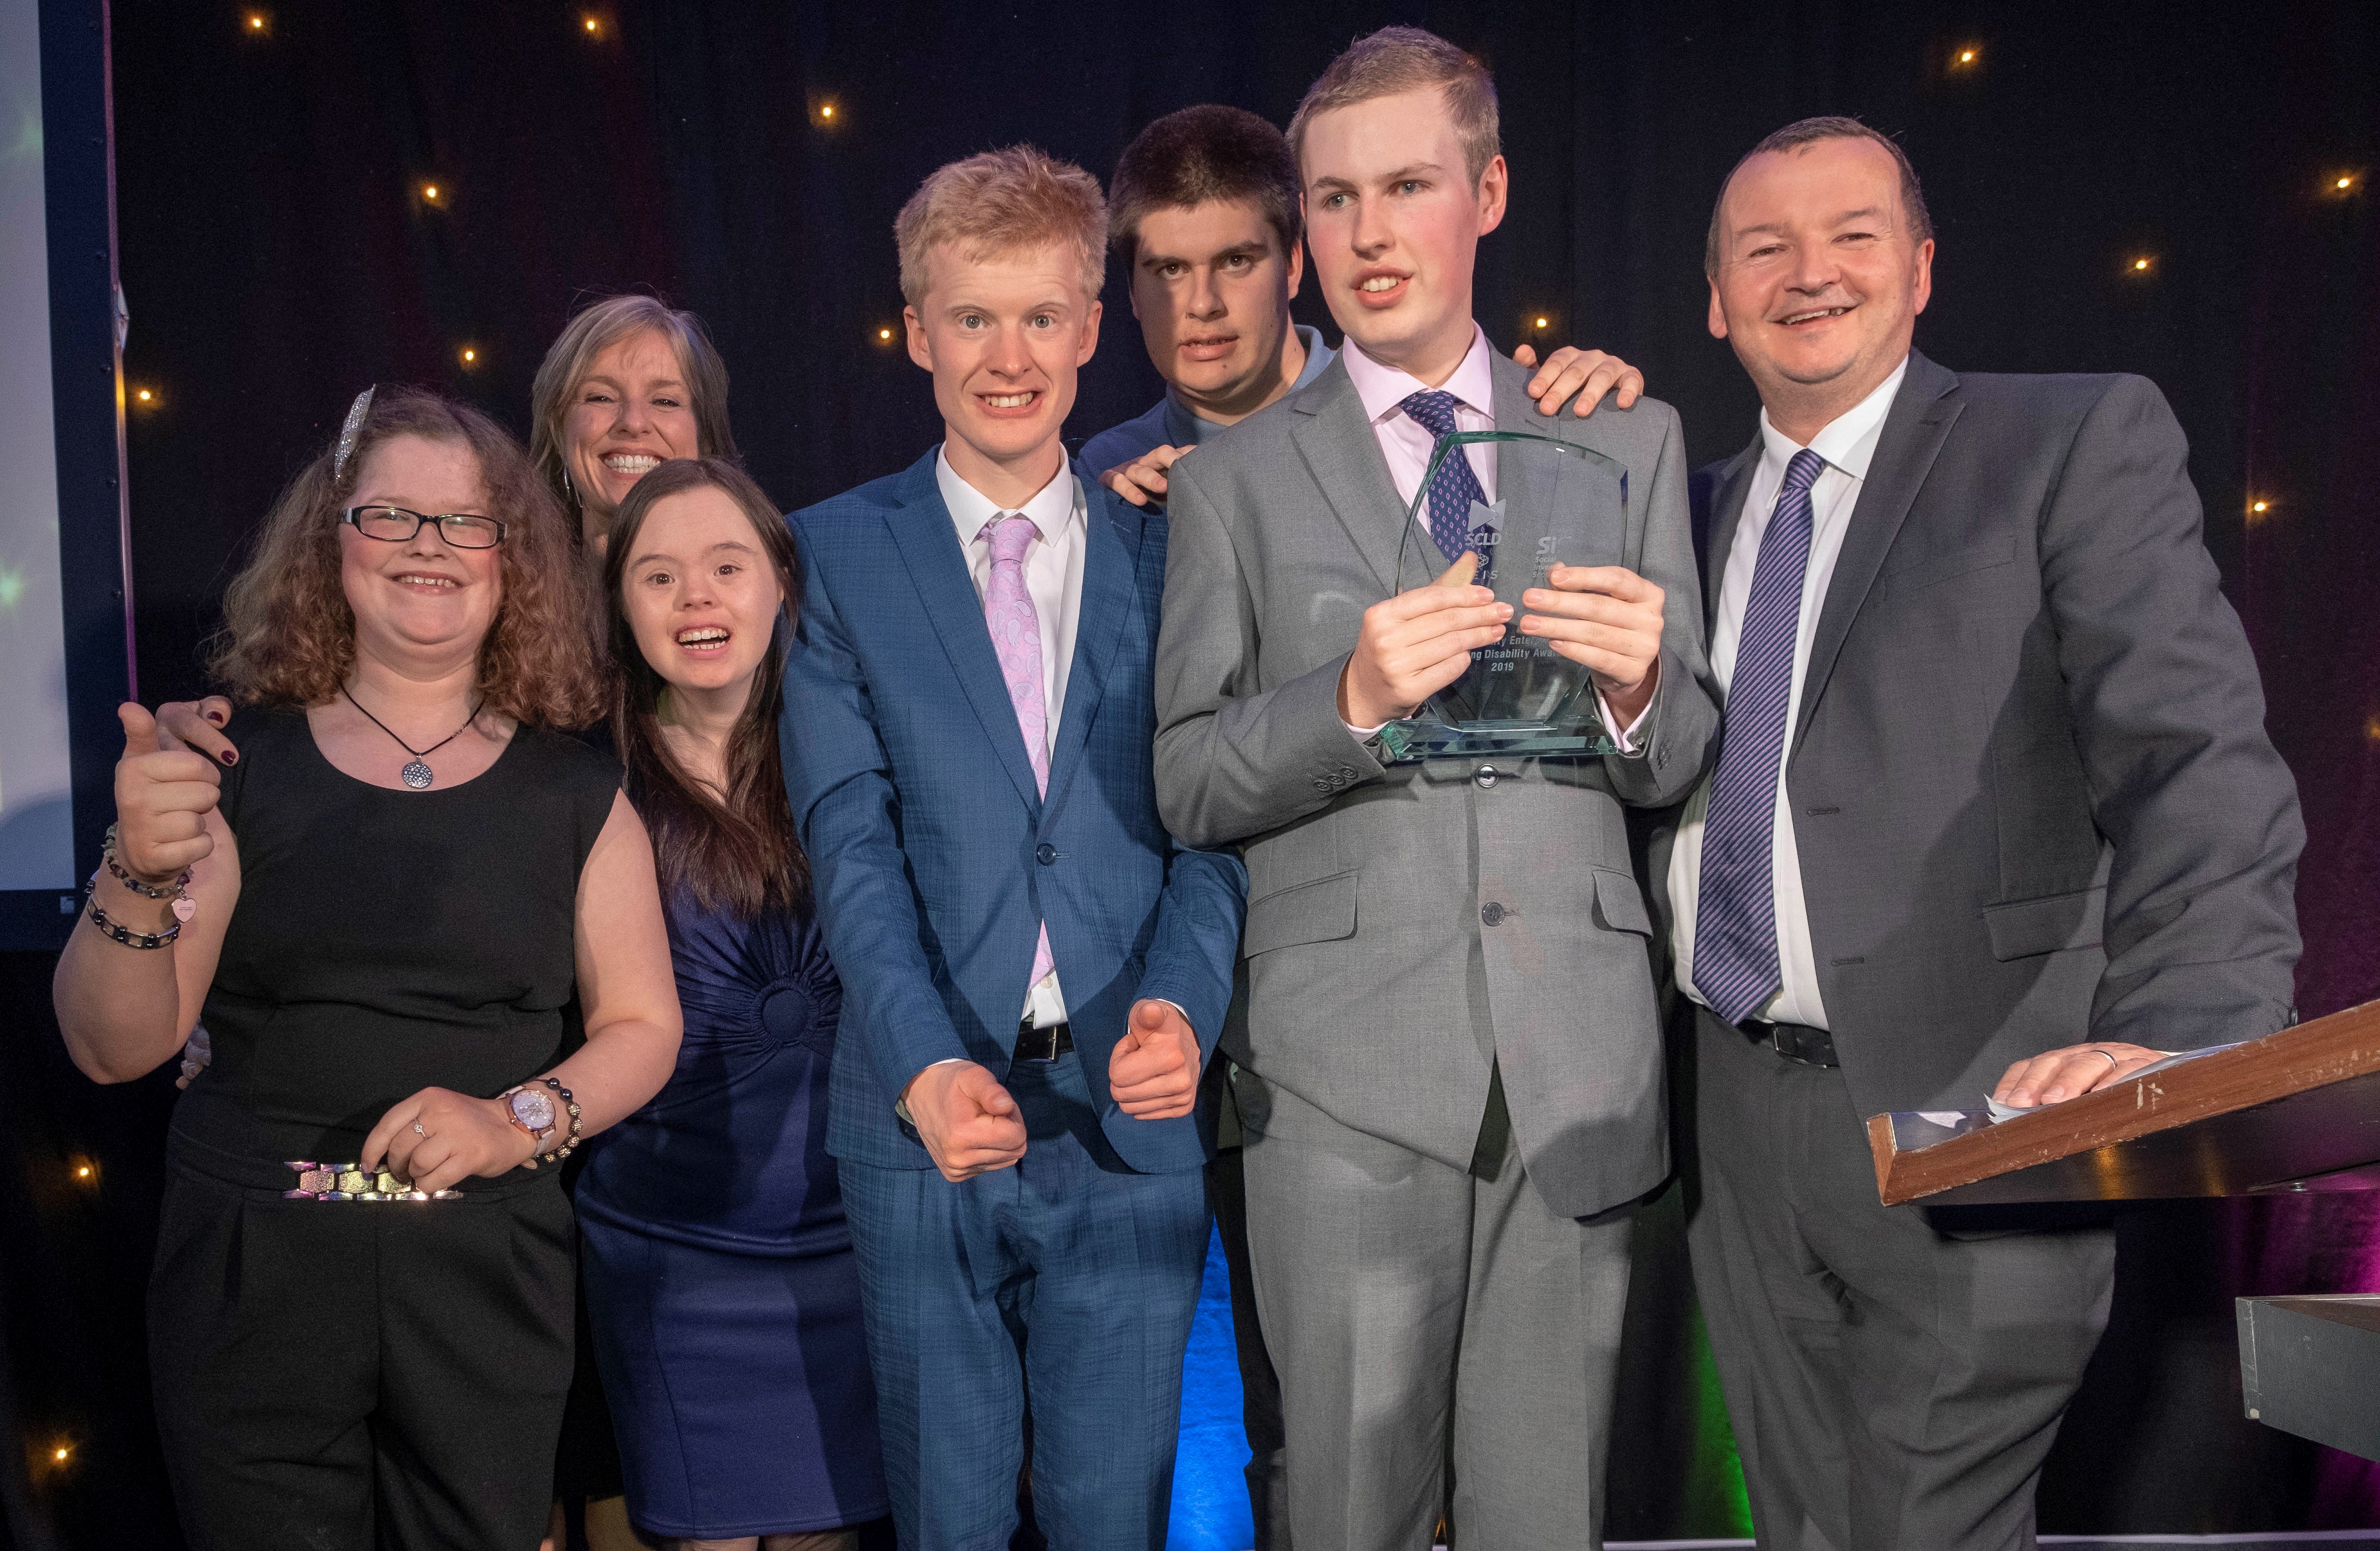 Students Shine as Charity Kitchen Project picks up National Award  